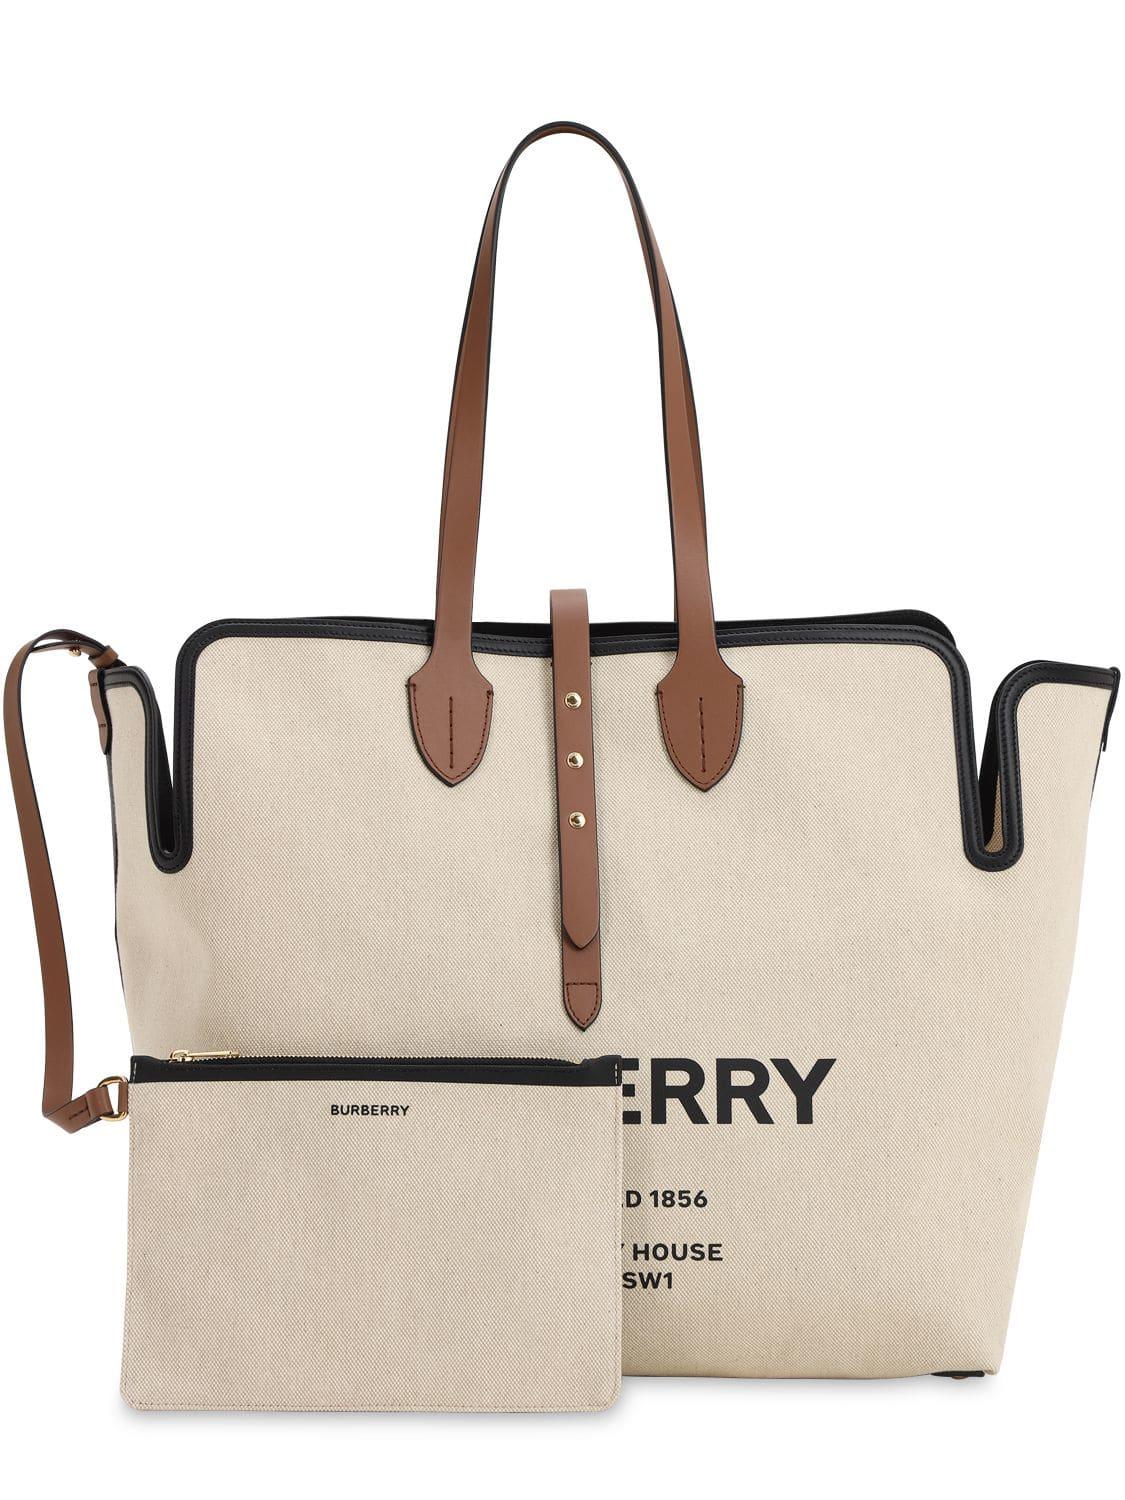 Burberry Tote Canvas Bag Germany, SAVE 54% - mpgc.net